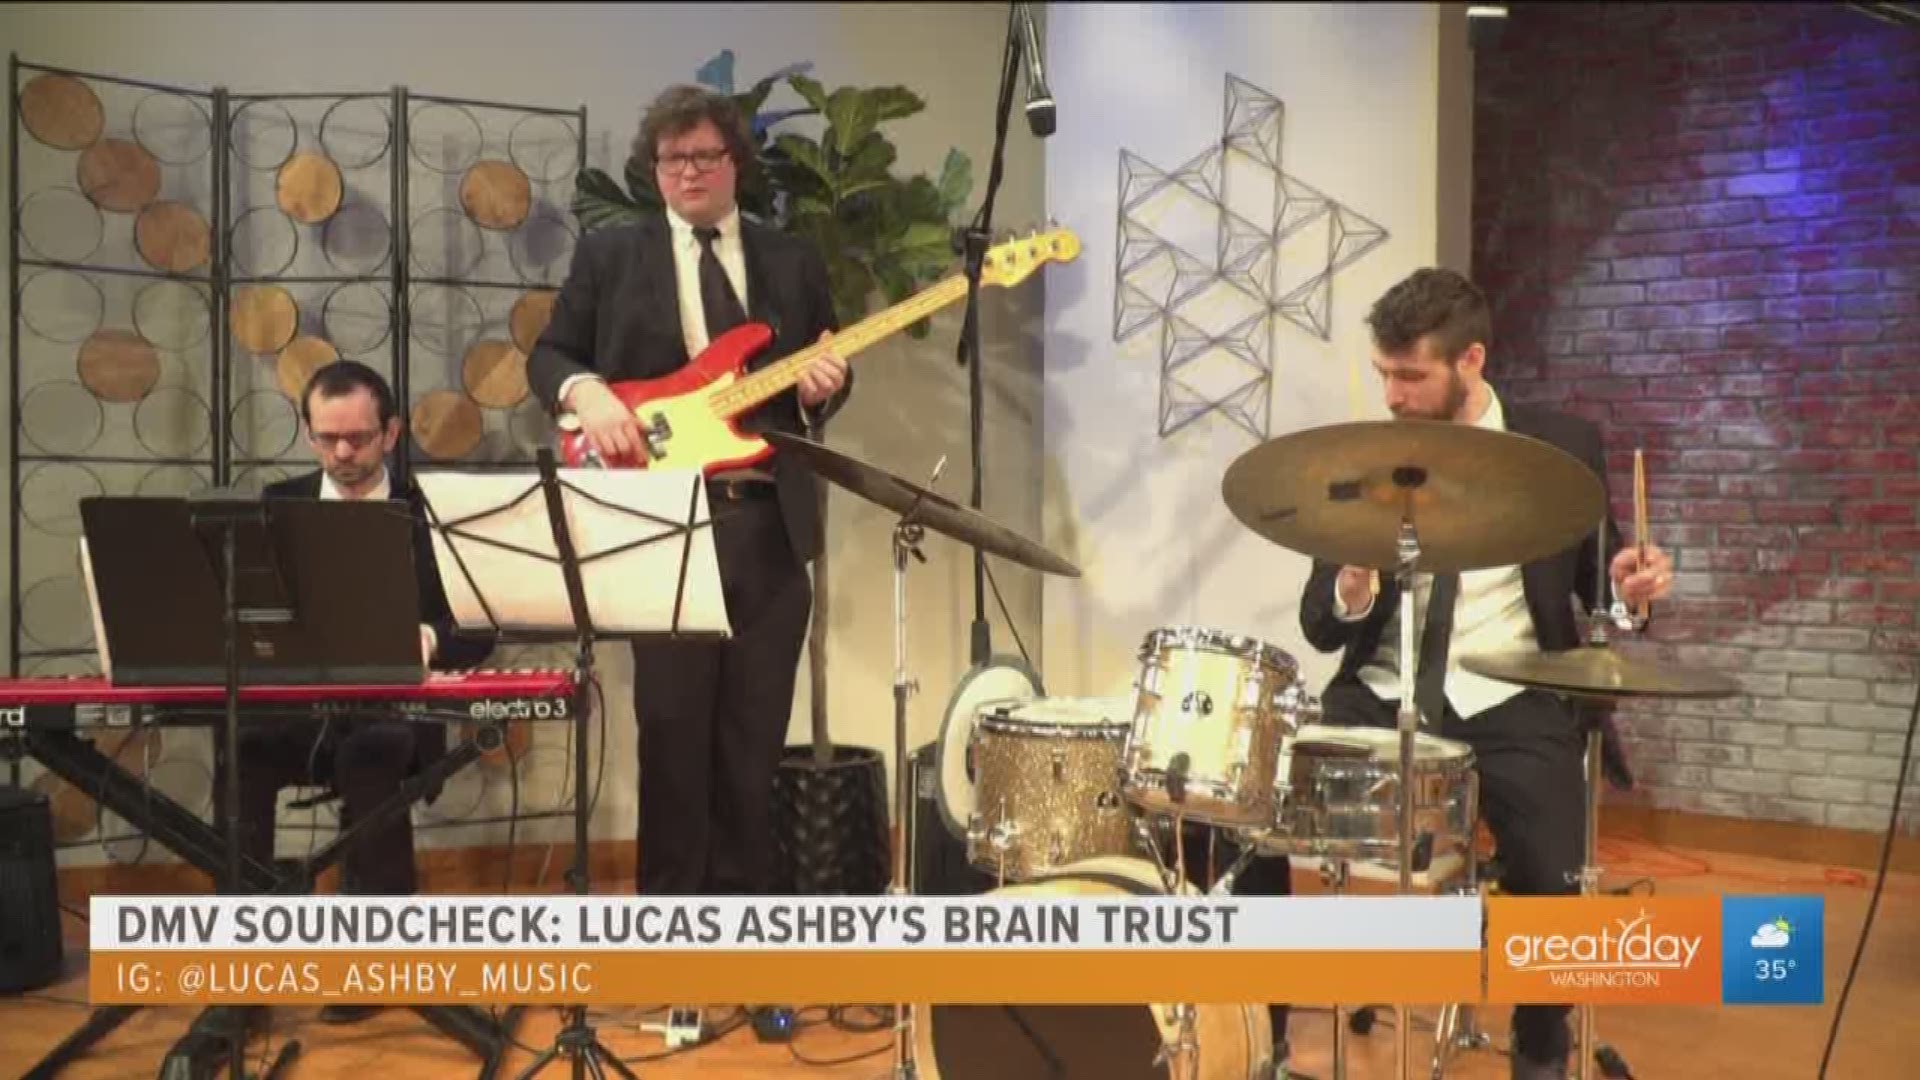 This week's featured artist is Lucas Ashby's Brain Trust.  The group fuses jazz and groove-based dance music for a unique sound.  Sponsored by the DC OCTFME.